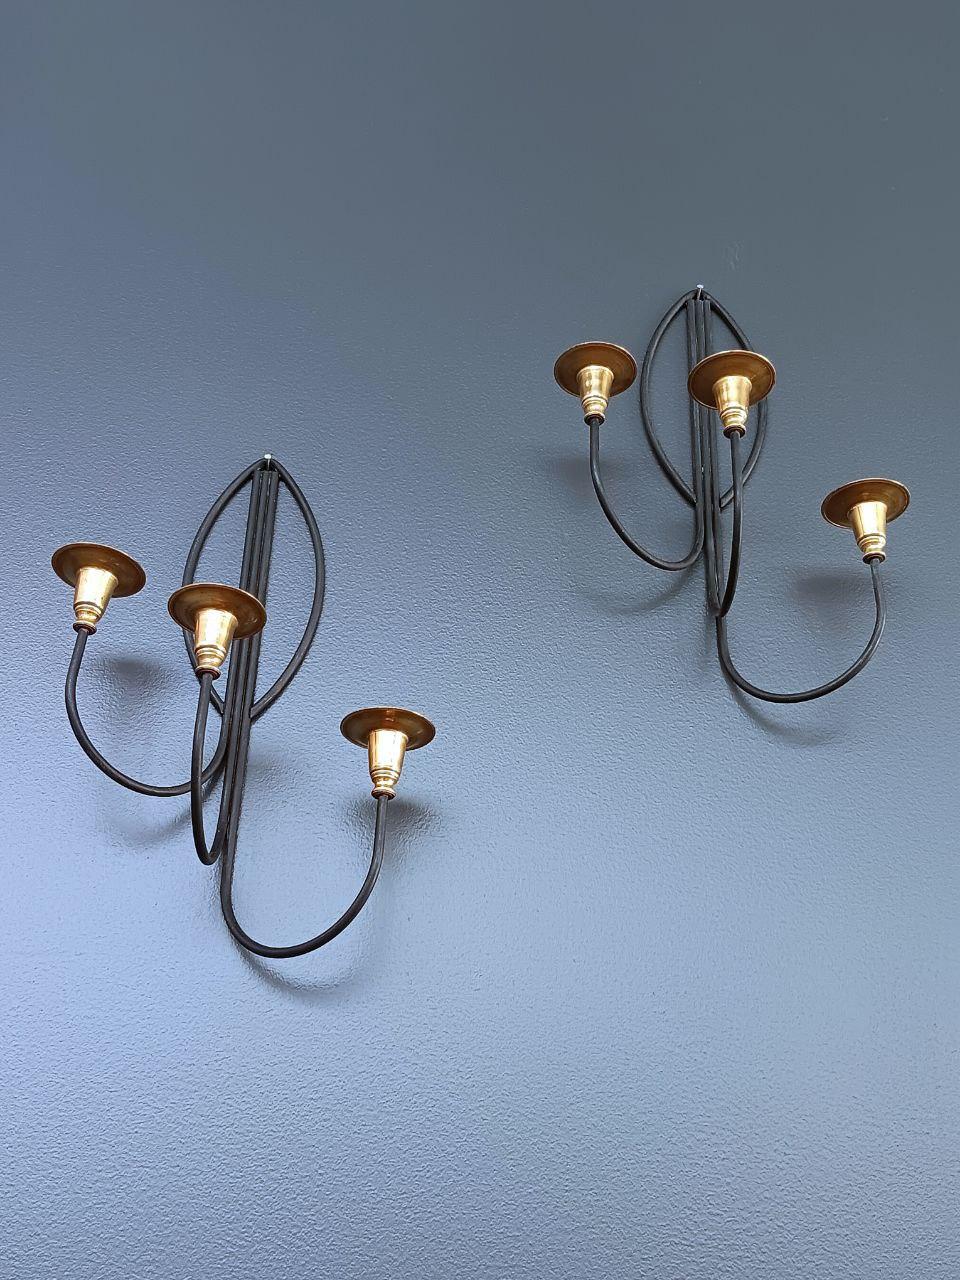 American Pair of Mid-Century Modern Iron & Brass Candle Wall Sconces For Sale